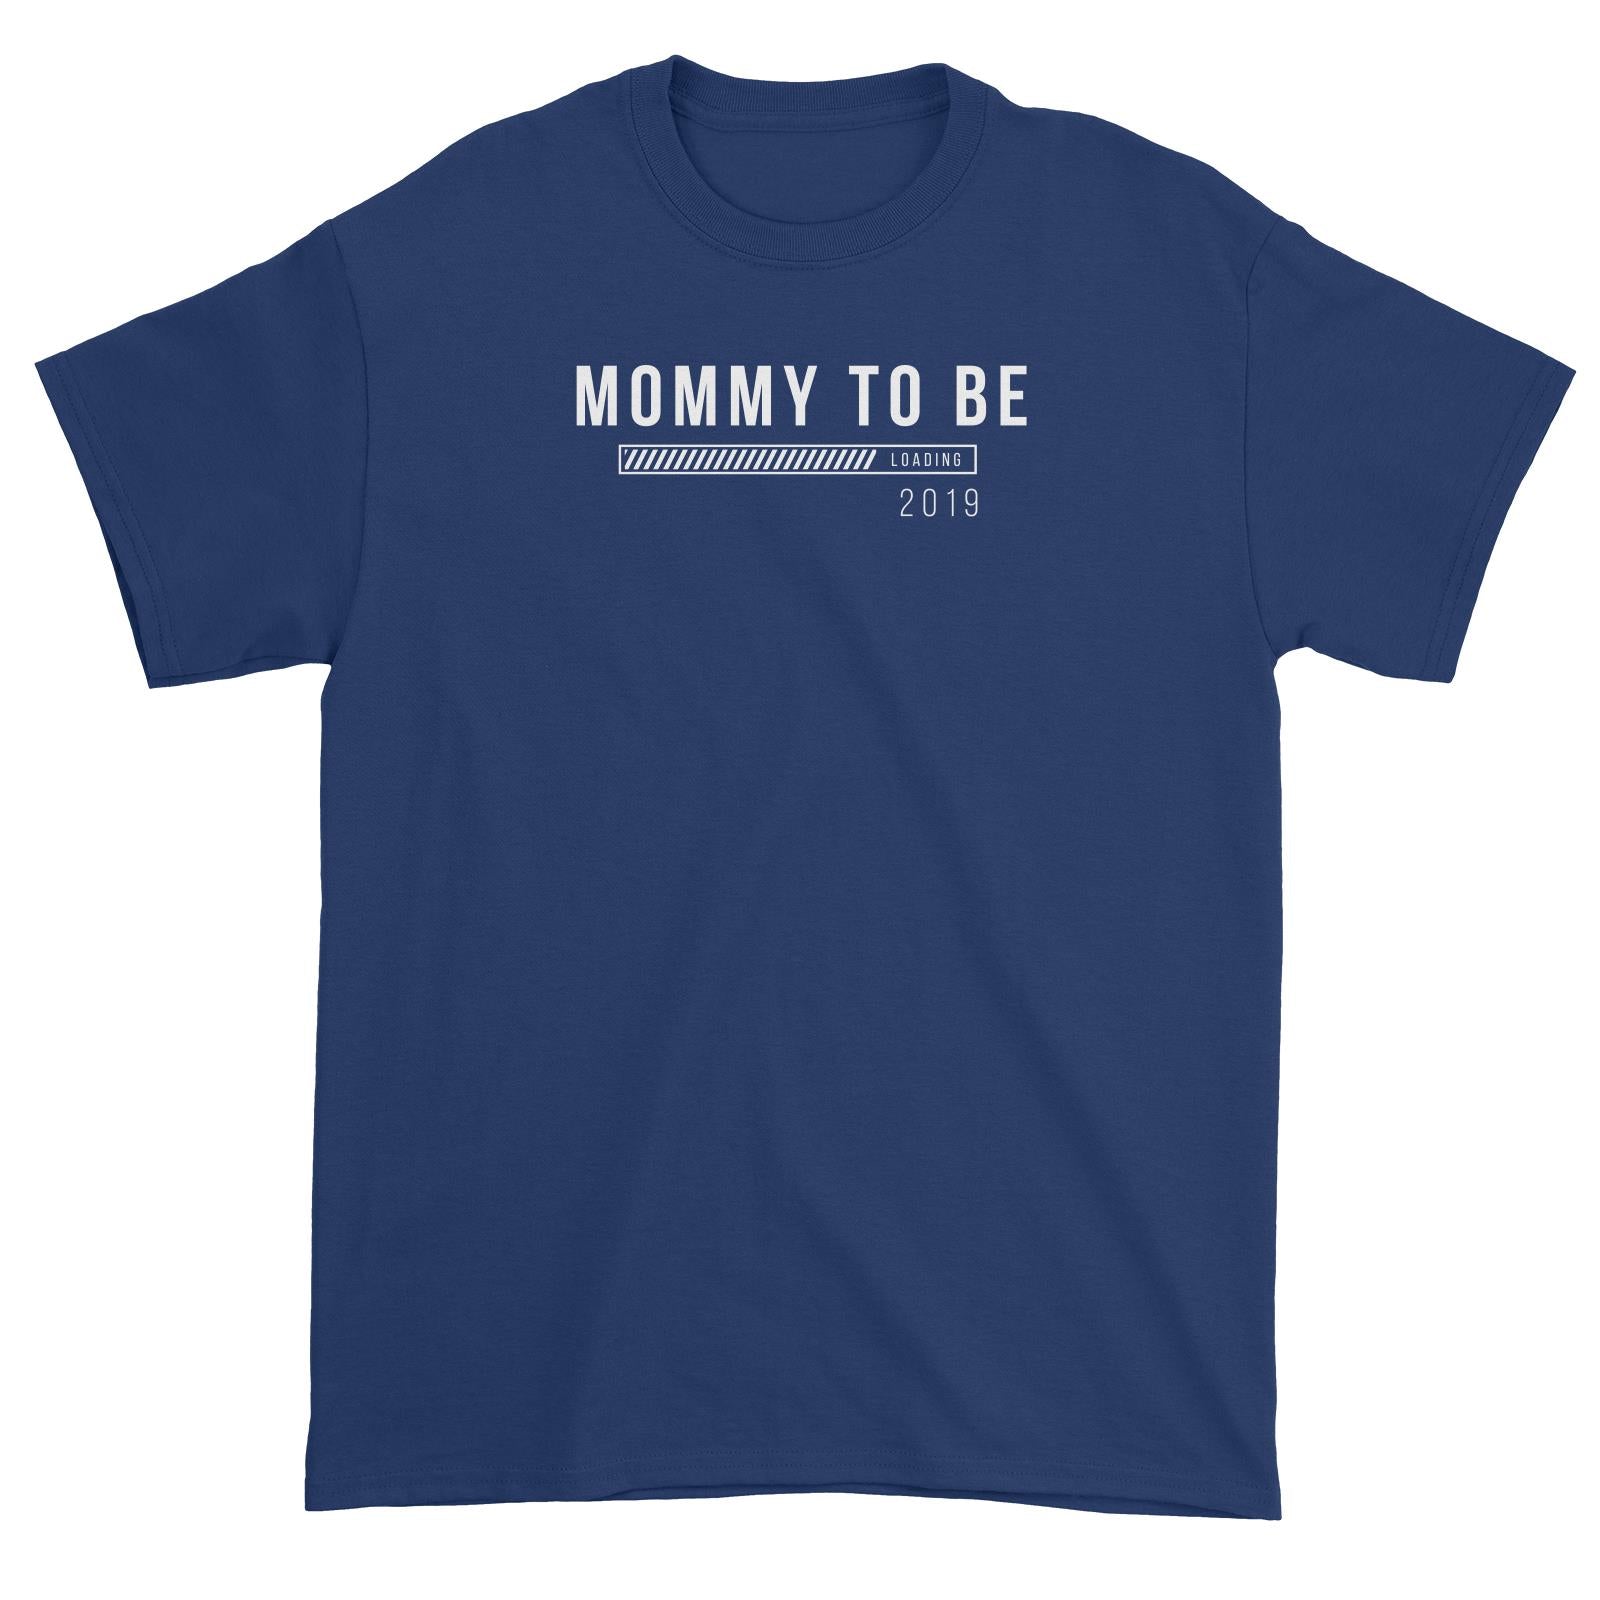 Coming Soon Family Mommy To Be Loading Add Date Unisex T-Shirt